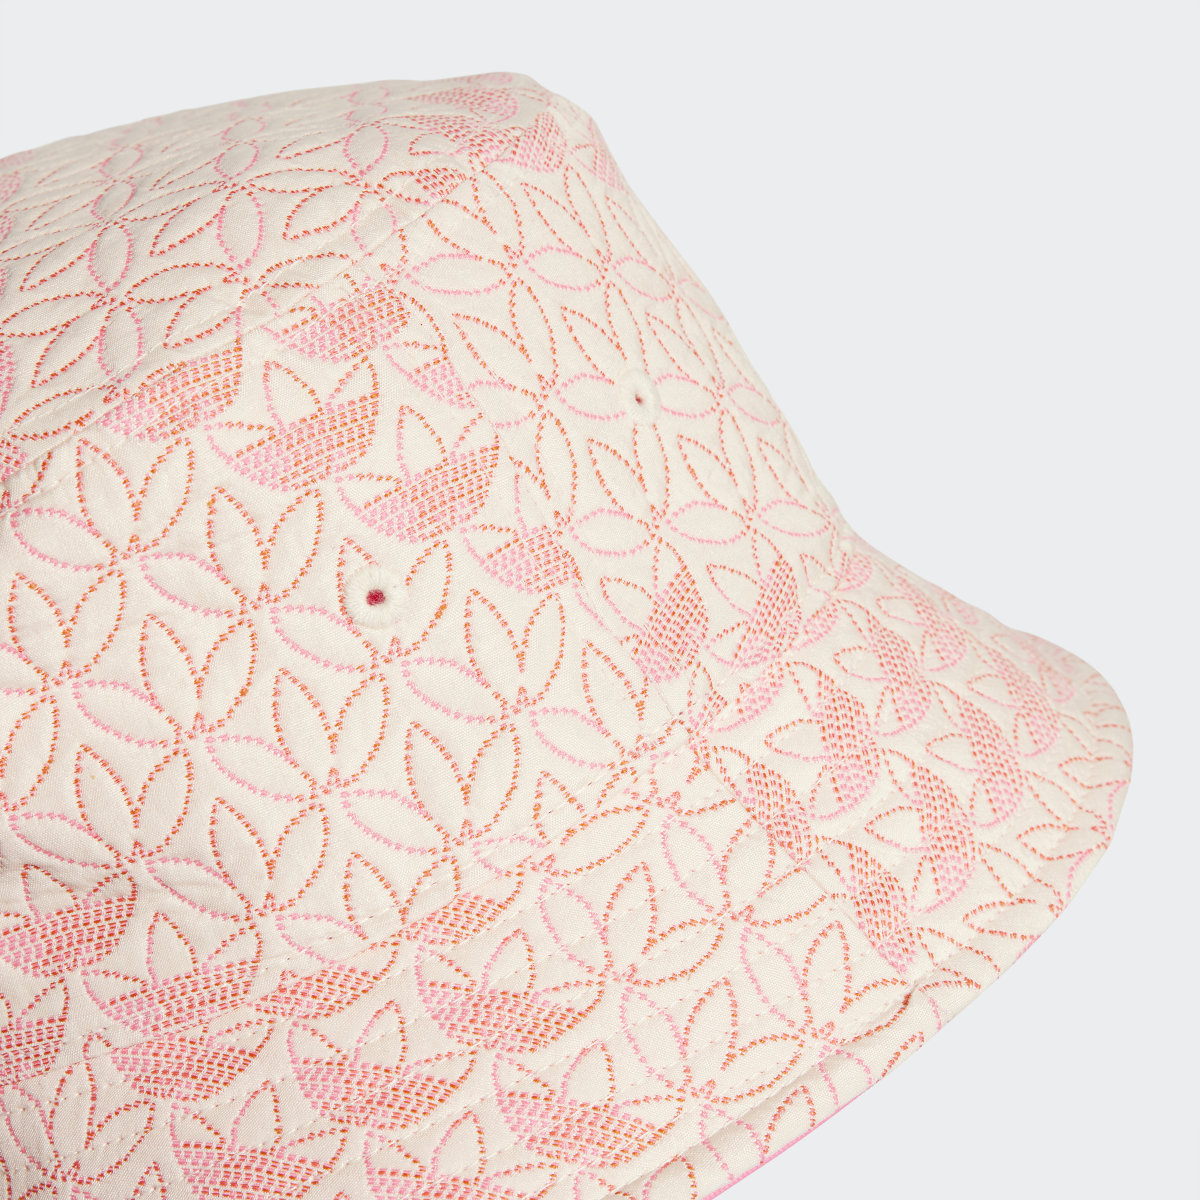 Adidas Quilted Trefoil Bucket Hat. 4